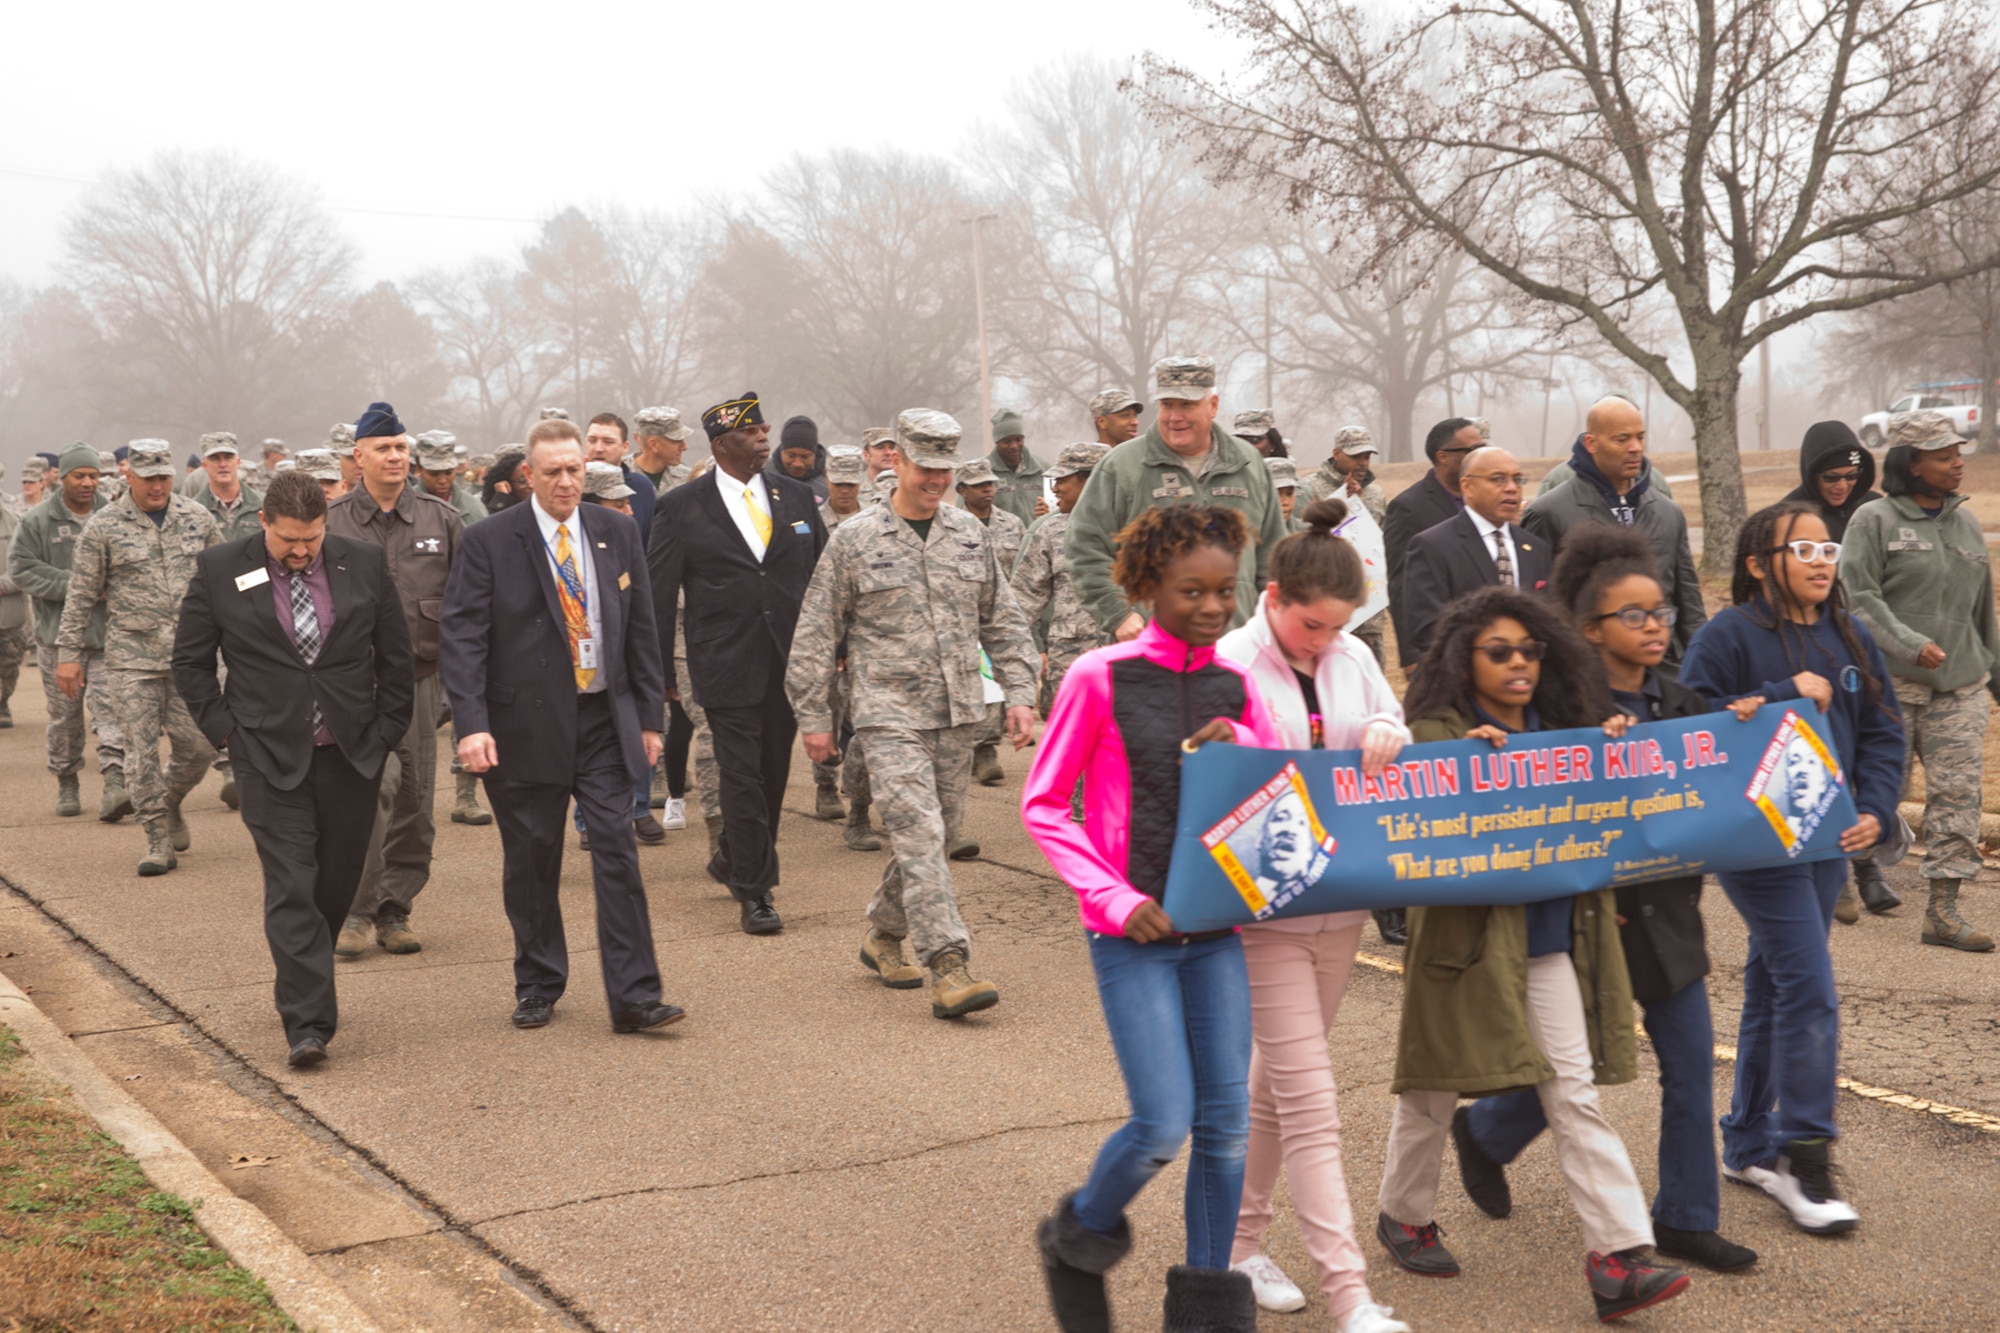 Team Little Rock celebrates “Unity in Community” with a Commemorative Walk during the 19th Airlift Wing’s Rev. Dr. Martin Luther King, Jr., March and Celebration at Little Rock Air Force Base, Ark., Jan. 13, 2017.  The guest speaker for the event was former Deputy Adjutant General for the State of Arkansas, Retired Brig. Gen. William J. Johnson. (U.S. Air Force photo by Master Sgt. Jeff Walston/Released)